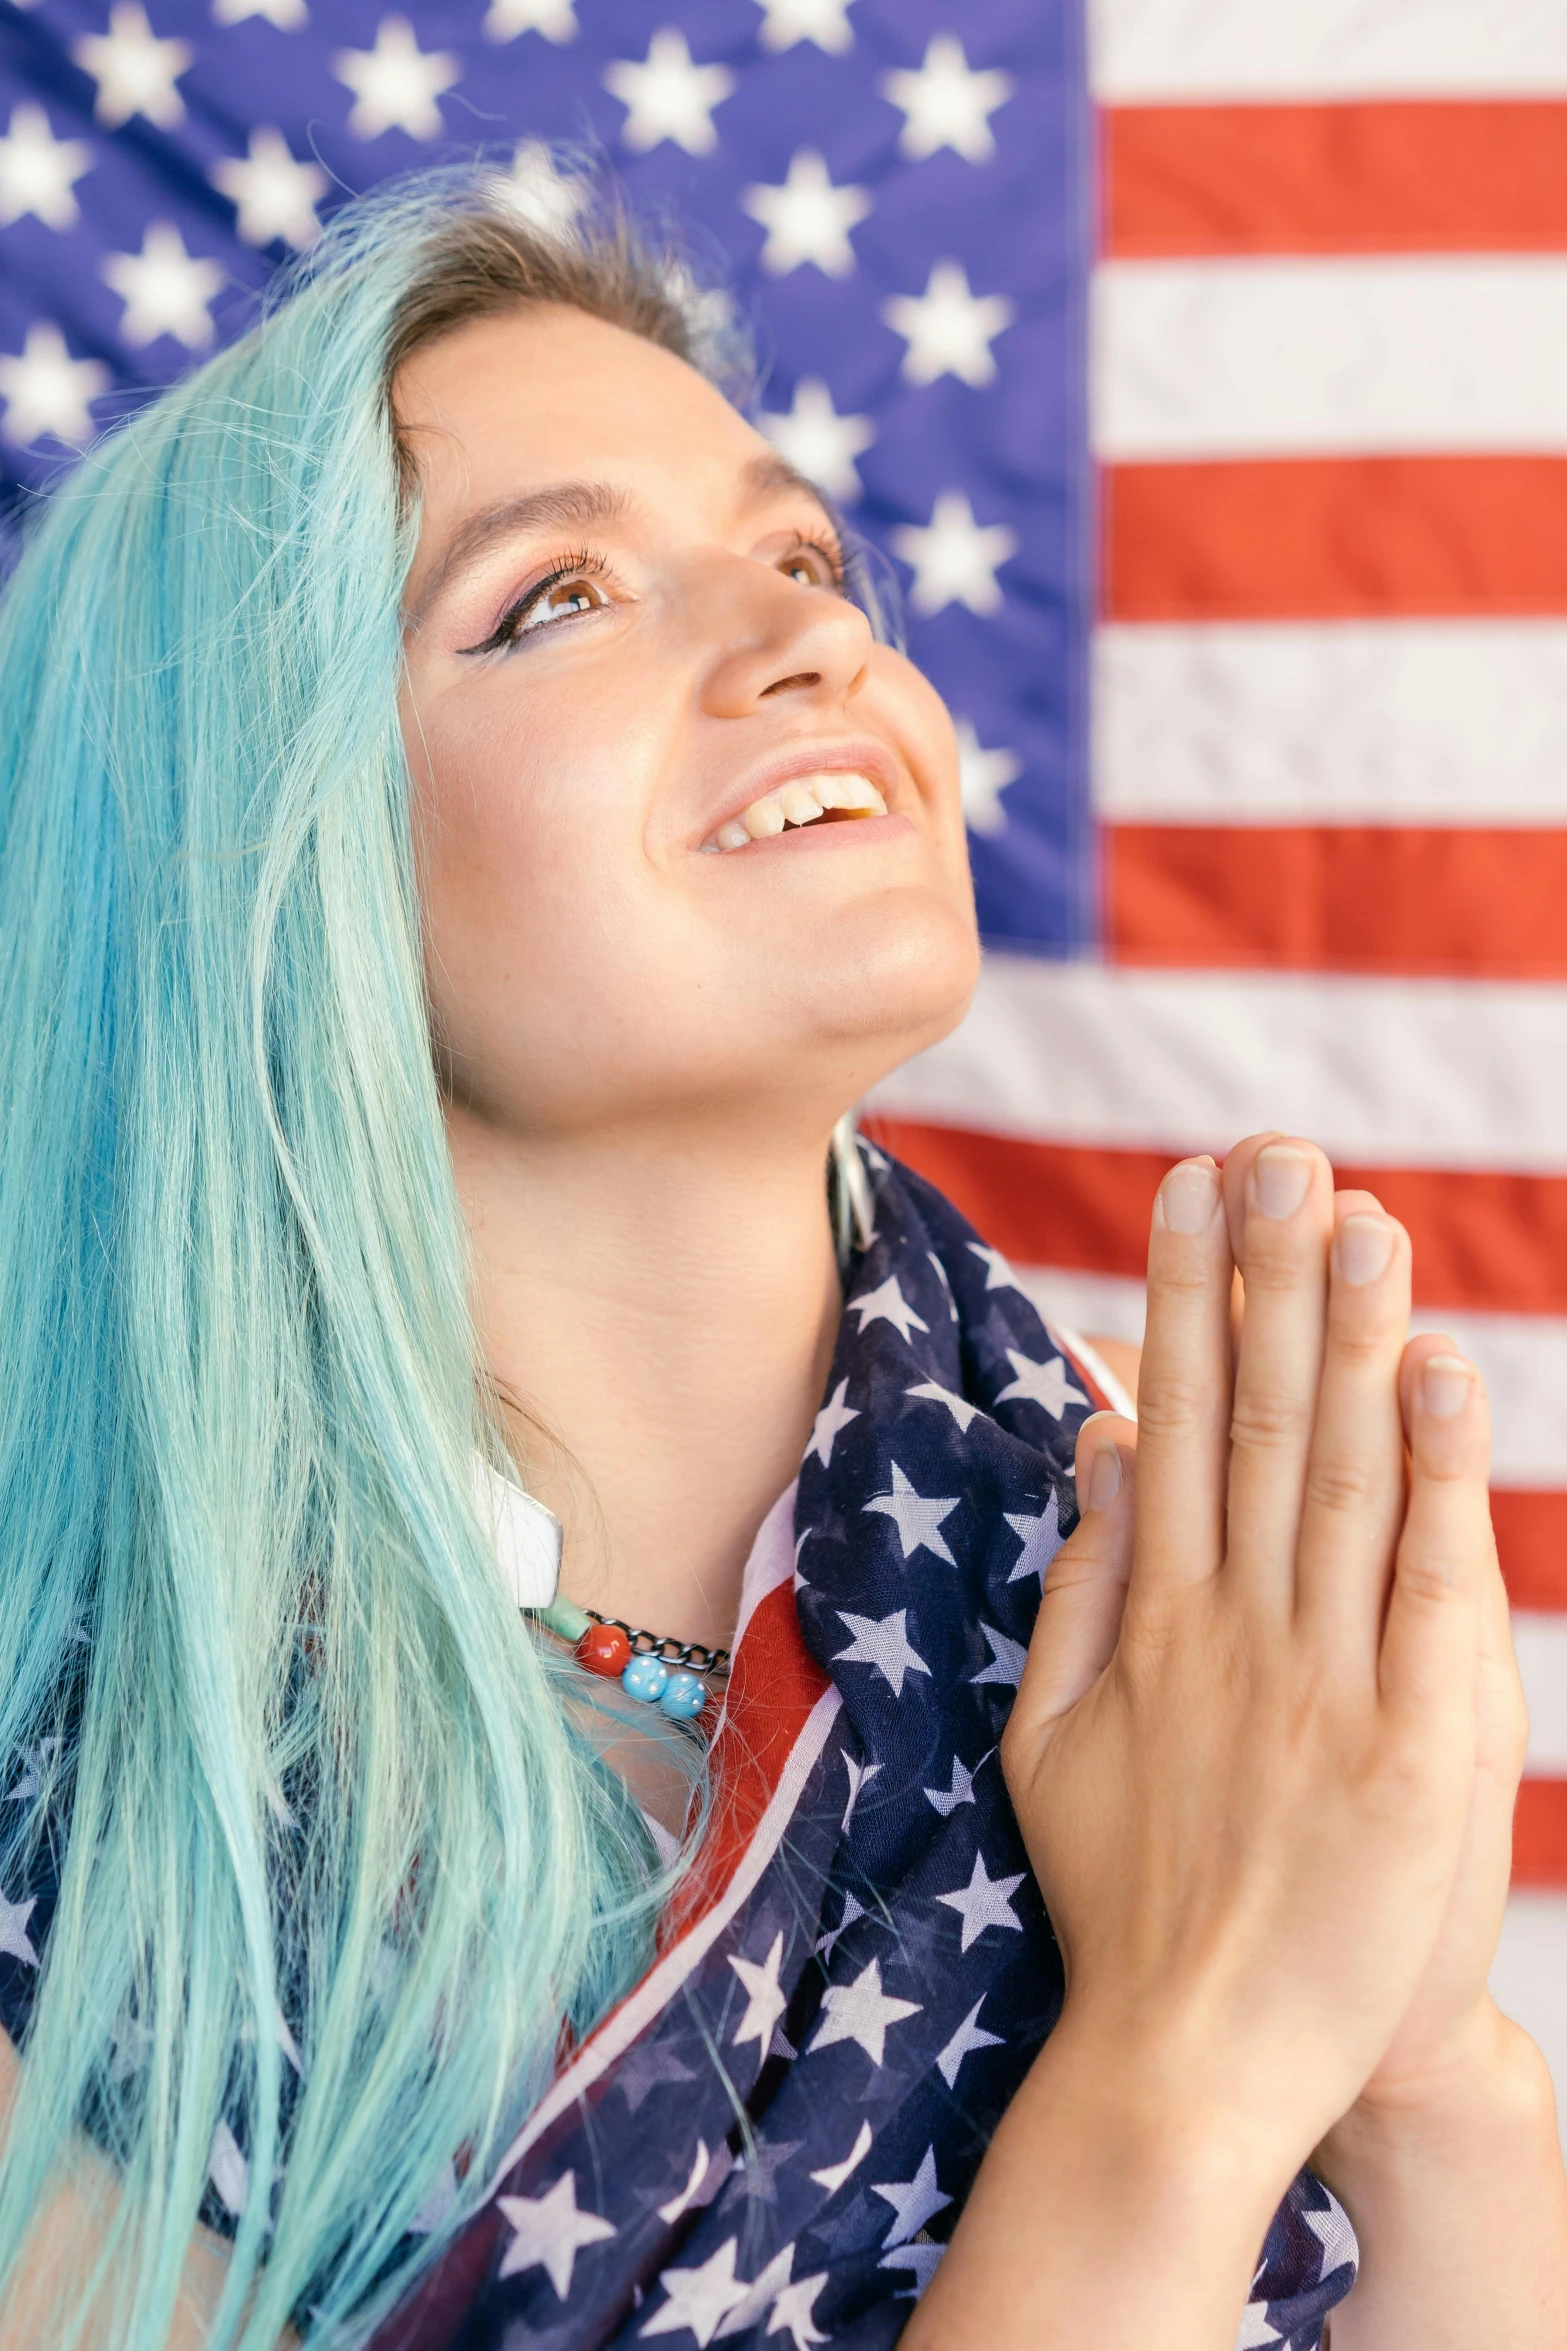 a woman with blue hair praying in front of an american flag, dye hair, proud smile, promo image, holy ceremony